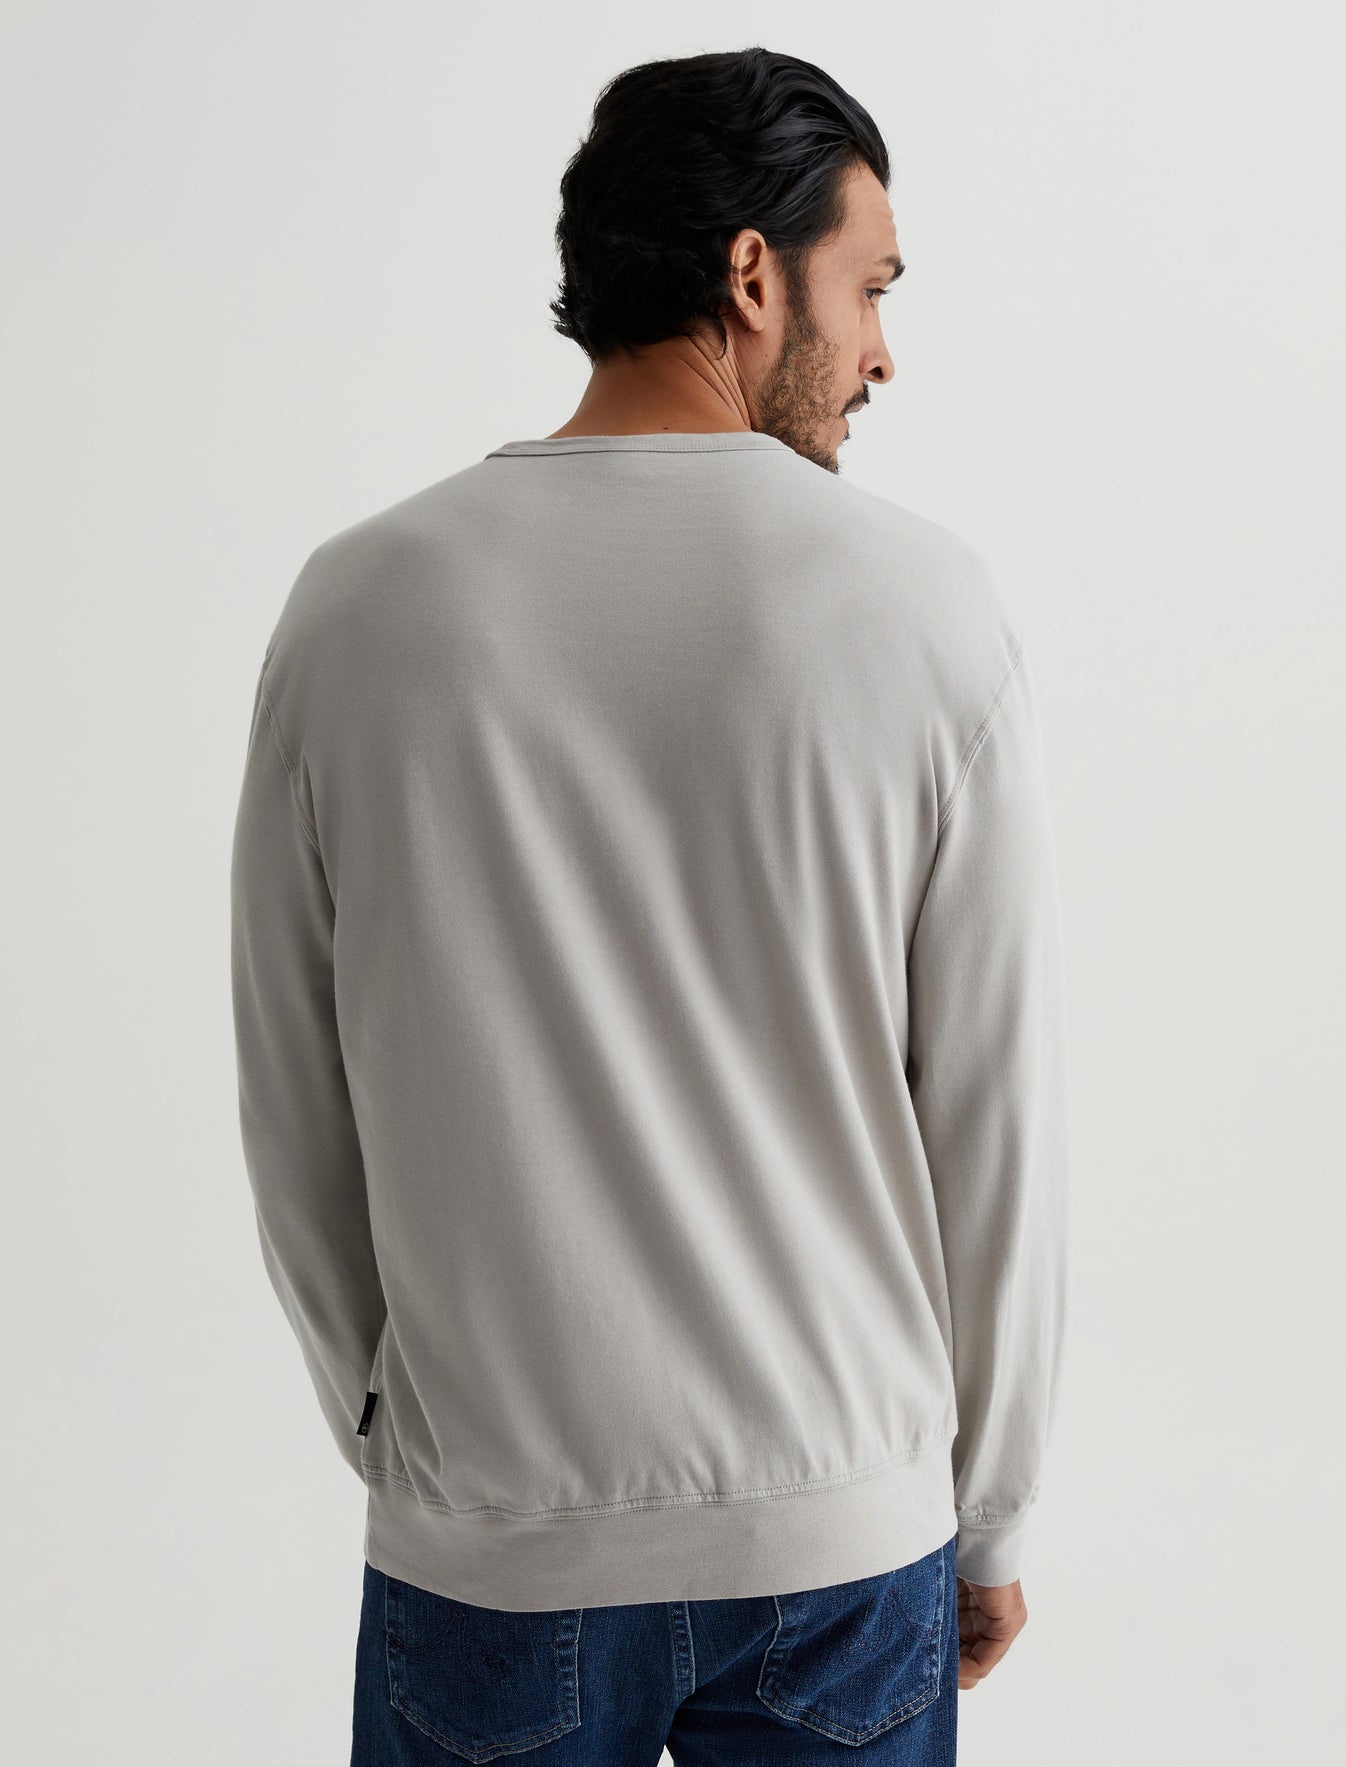 Wesley Pullover Silver Grey Relaxed Fit Long Sleeve Crew Neck Pullover Mens Top Photo 6